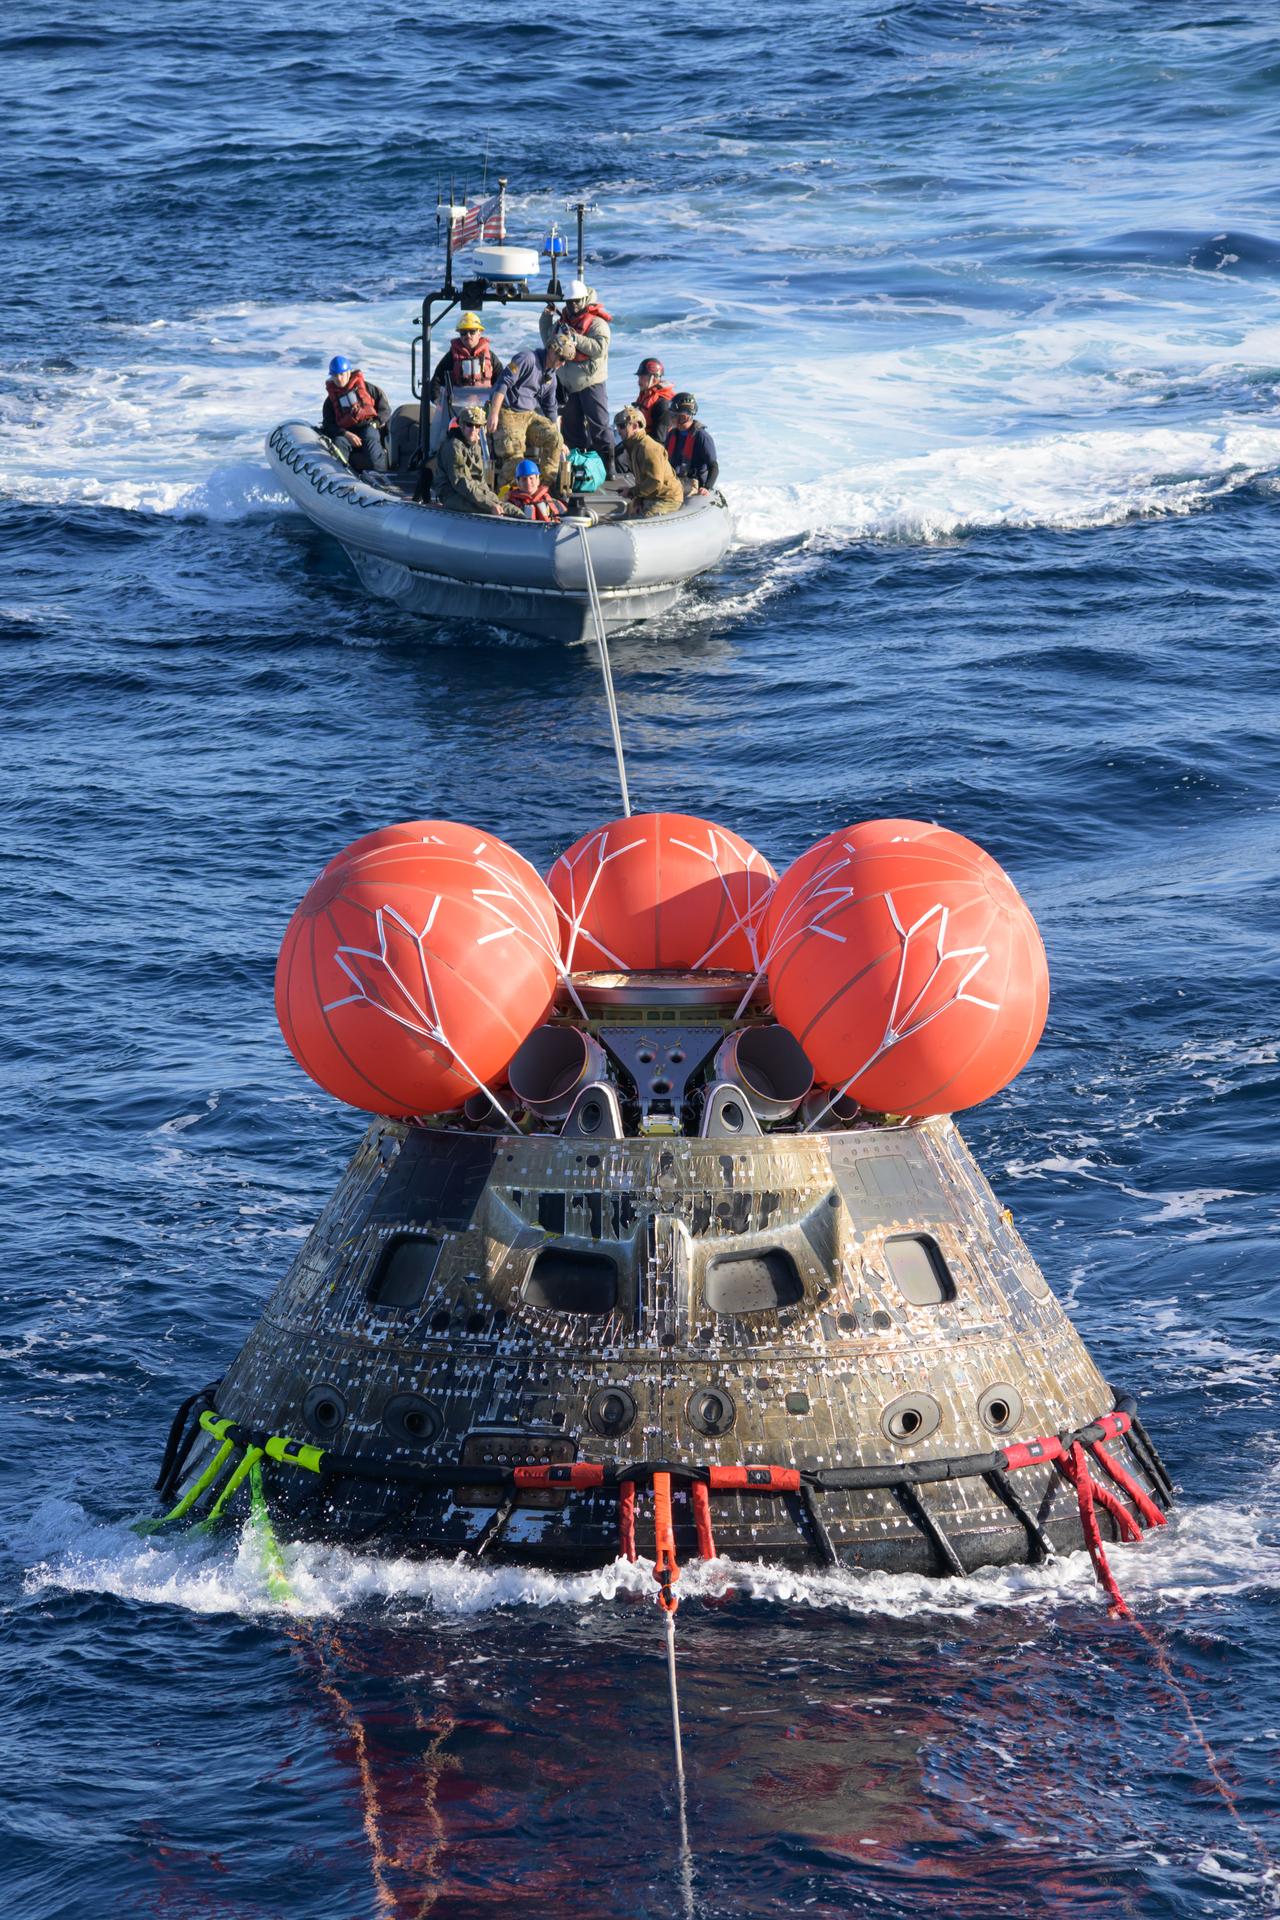 After splashing down at 12:40 p.m. EST on Dec. 11, 2022, U.S. Navy divers help recover the Orion Spacecraft for the Artemis I mission. NASA, the Navy and other Department of Defense partners worked together to secure the spacecraft inside the well deck of USS Portland approximately five hours after Orion splashed down in the Pacific Ocean off the coast of California.